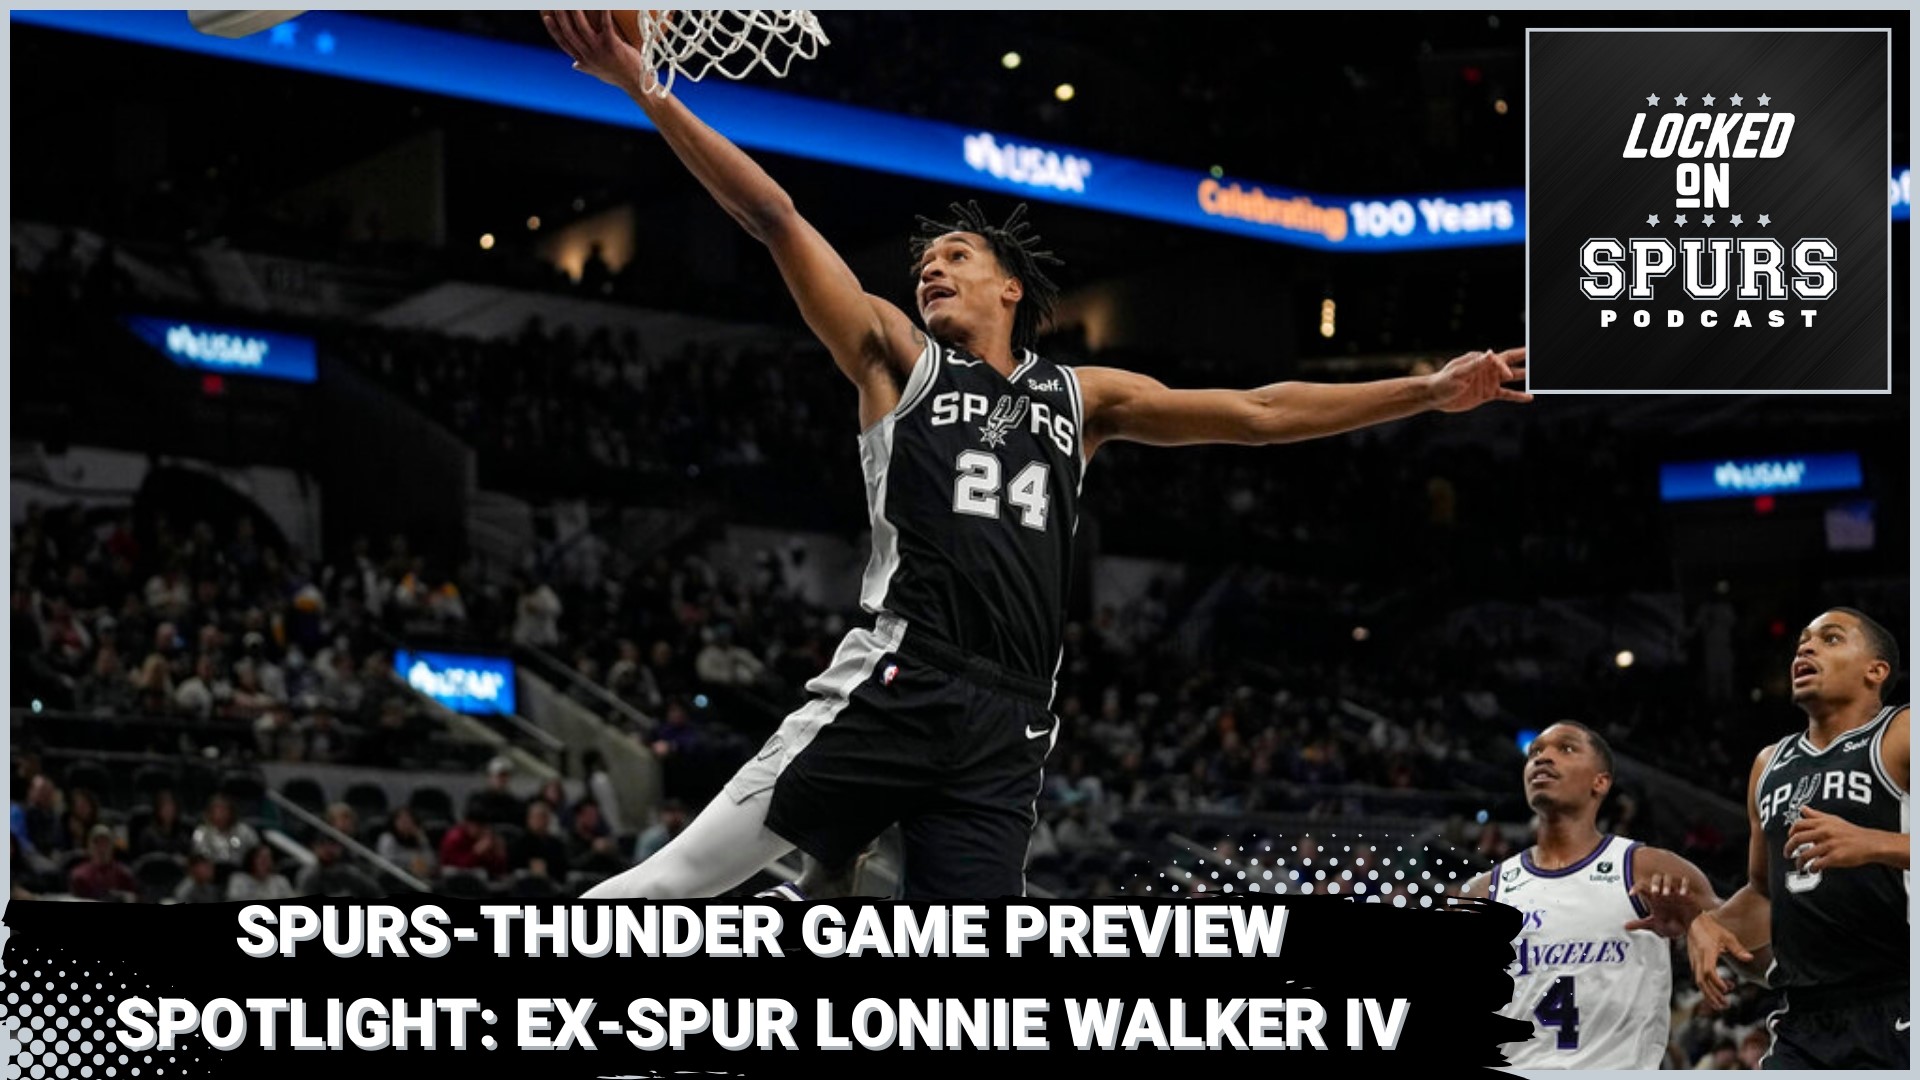 Spurs take on the Thunder looking to end their losing skid.